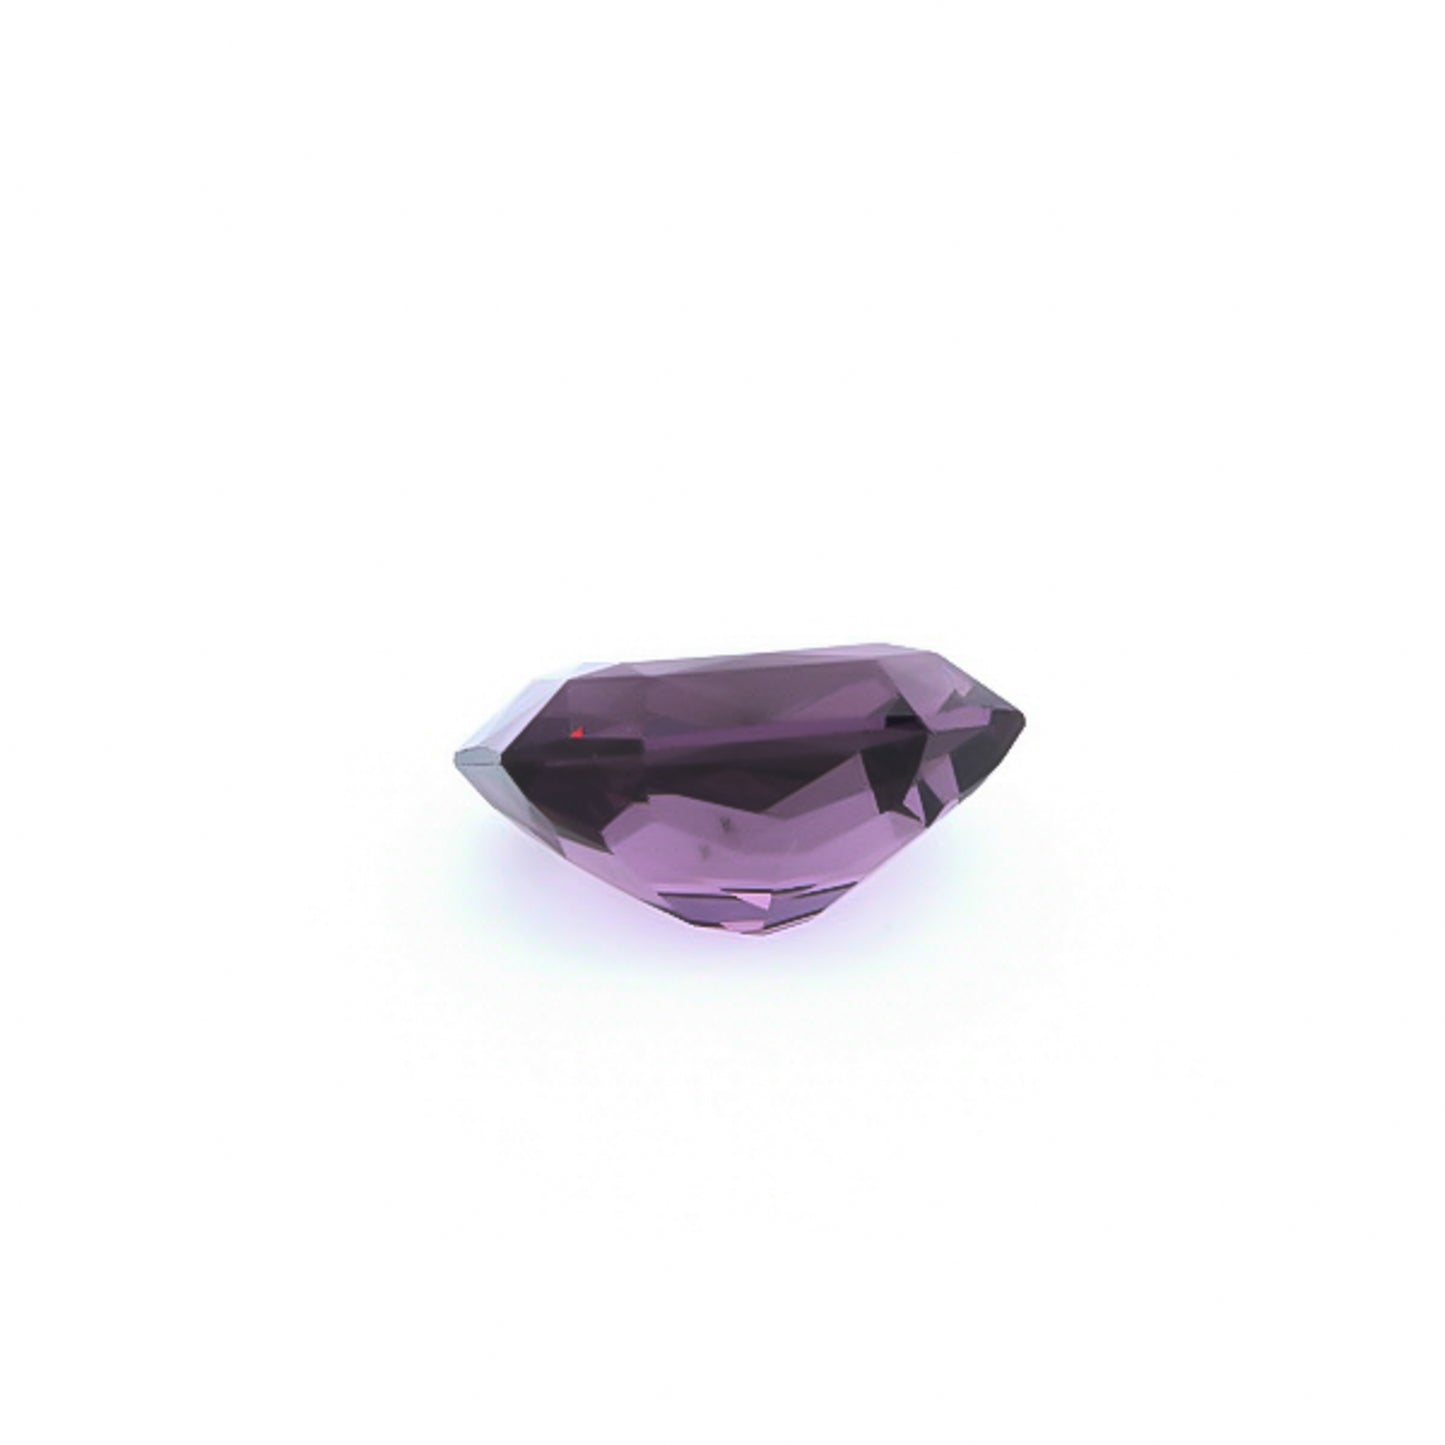 Load image into Gallery viewer, Natural Unheated Purple Spinel Octagonal Shape 8.78 Carats With GIA Report
